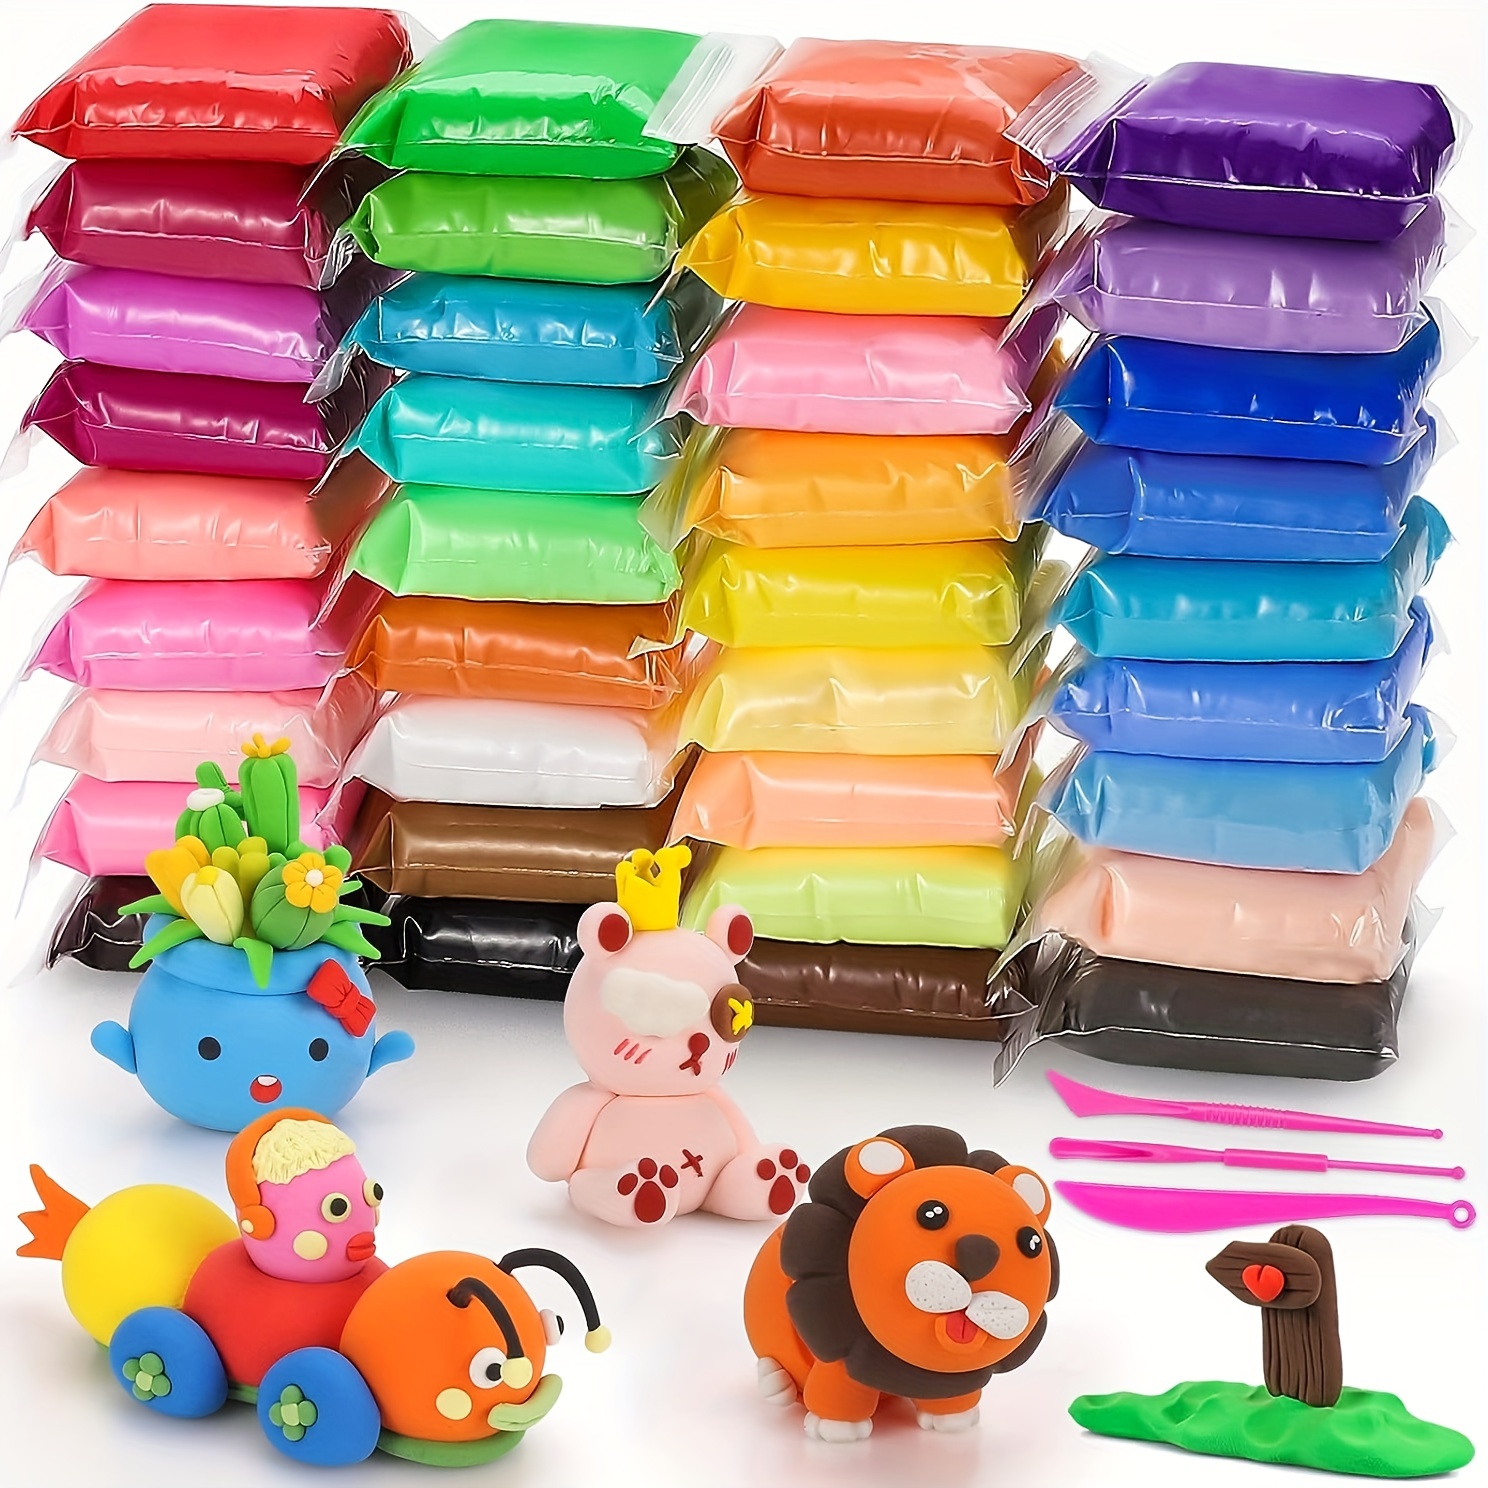 Play-Doh Air Dry Clay for Kids | 80-Pack Model Magic Clay Set | Playdough  Bulk Pack for Classroom Birthday Party Favors | Air Dry Clay Modeling Clay